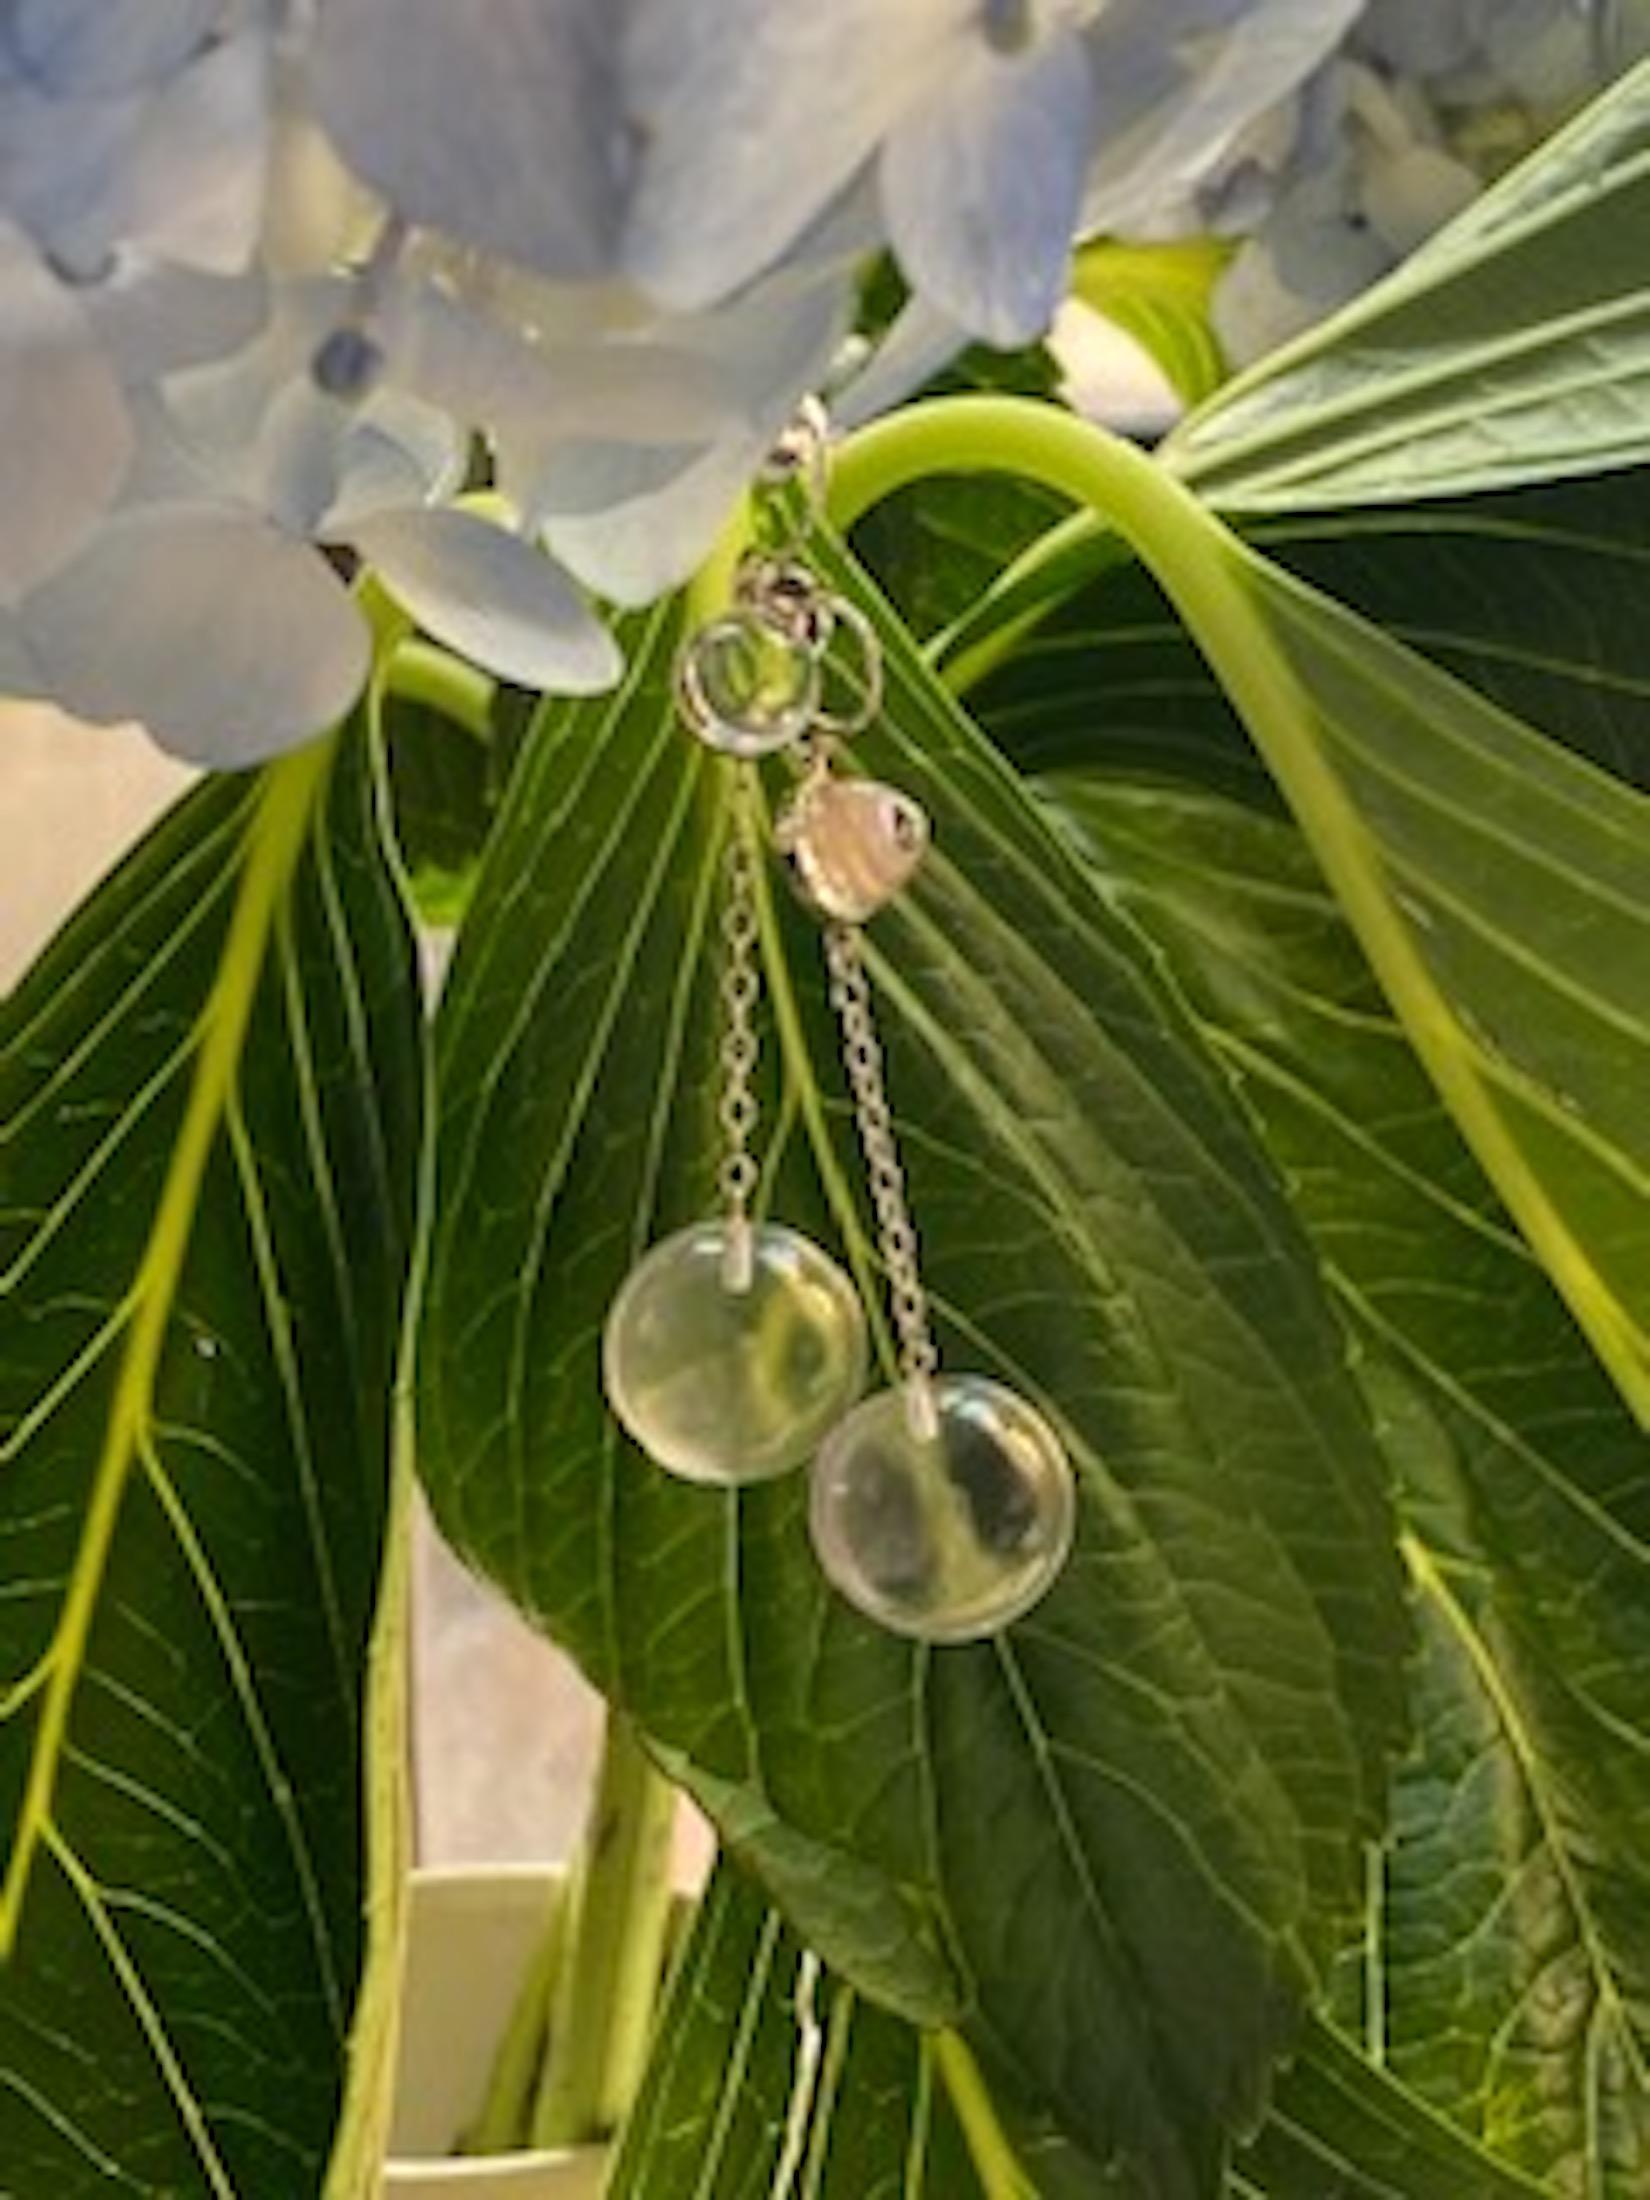 Chic Rock Crystal Ball Drop Earrings from April in Paris Designs. Merideth McGregor has designed a variety of rock crystal earrings each of which are sure to enhance the stylish outfits in your wardrobe.